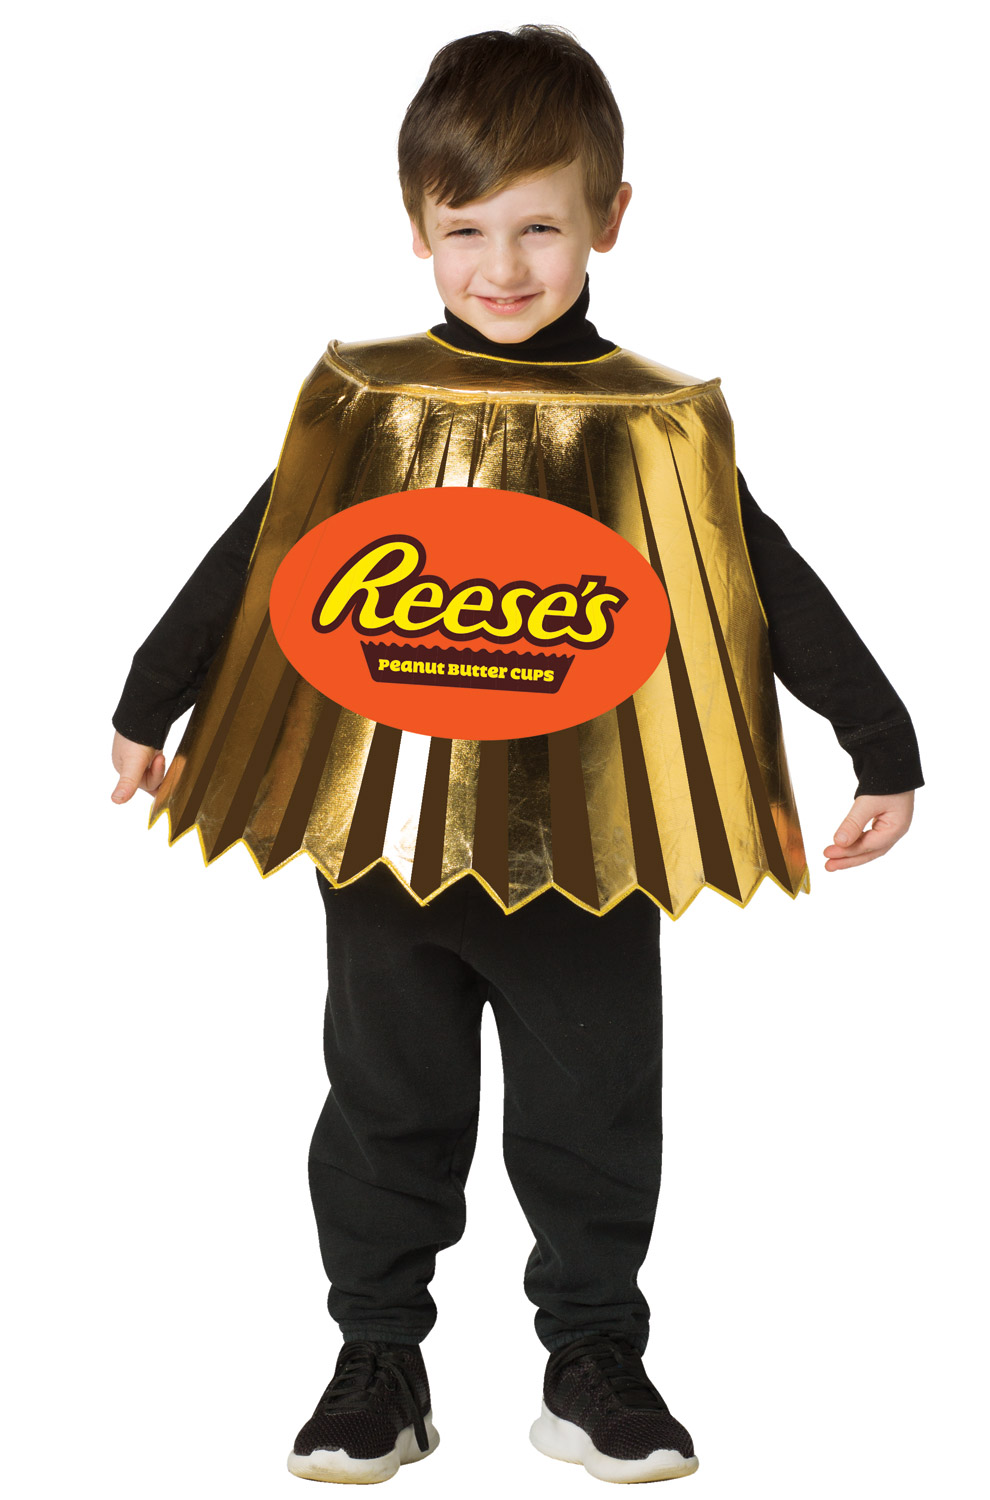 Reese's Cup Mini Child Costume.